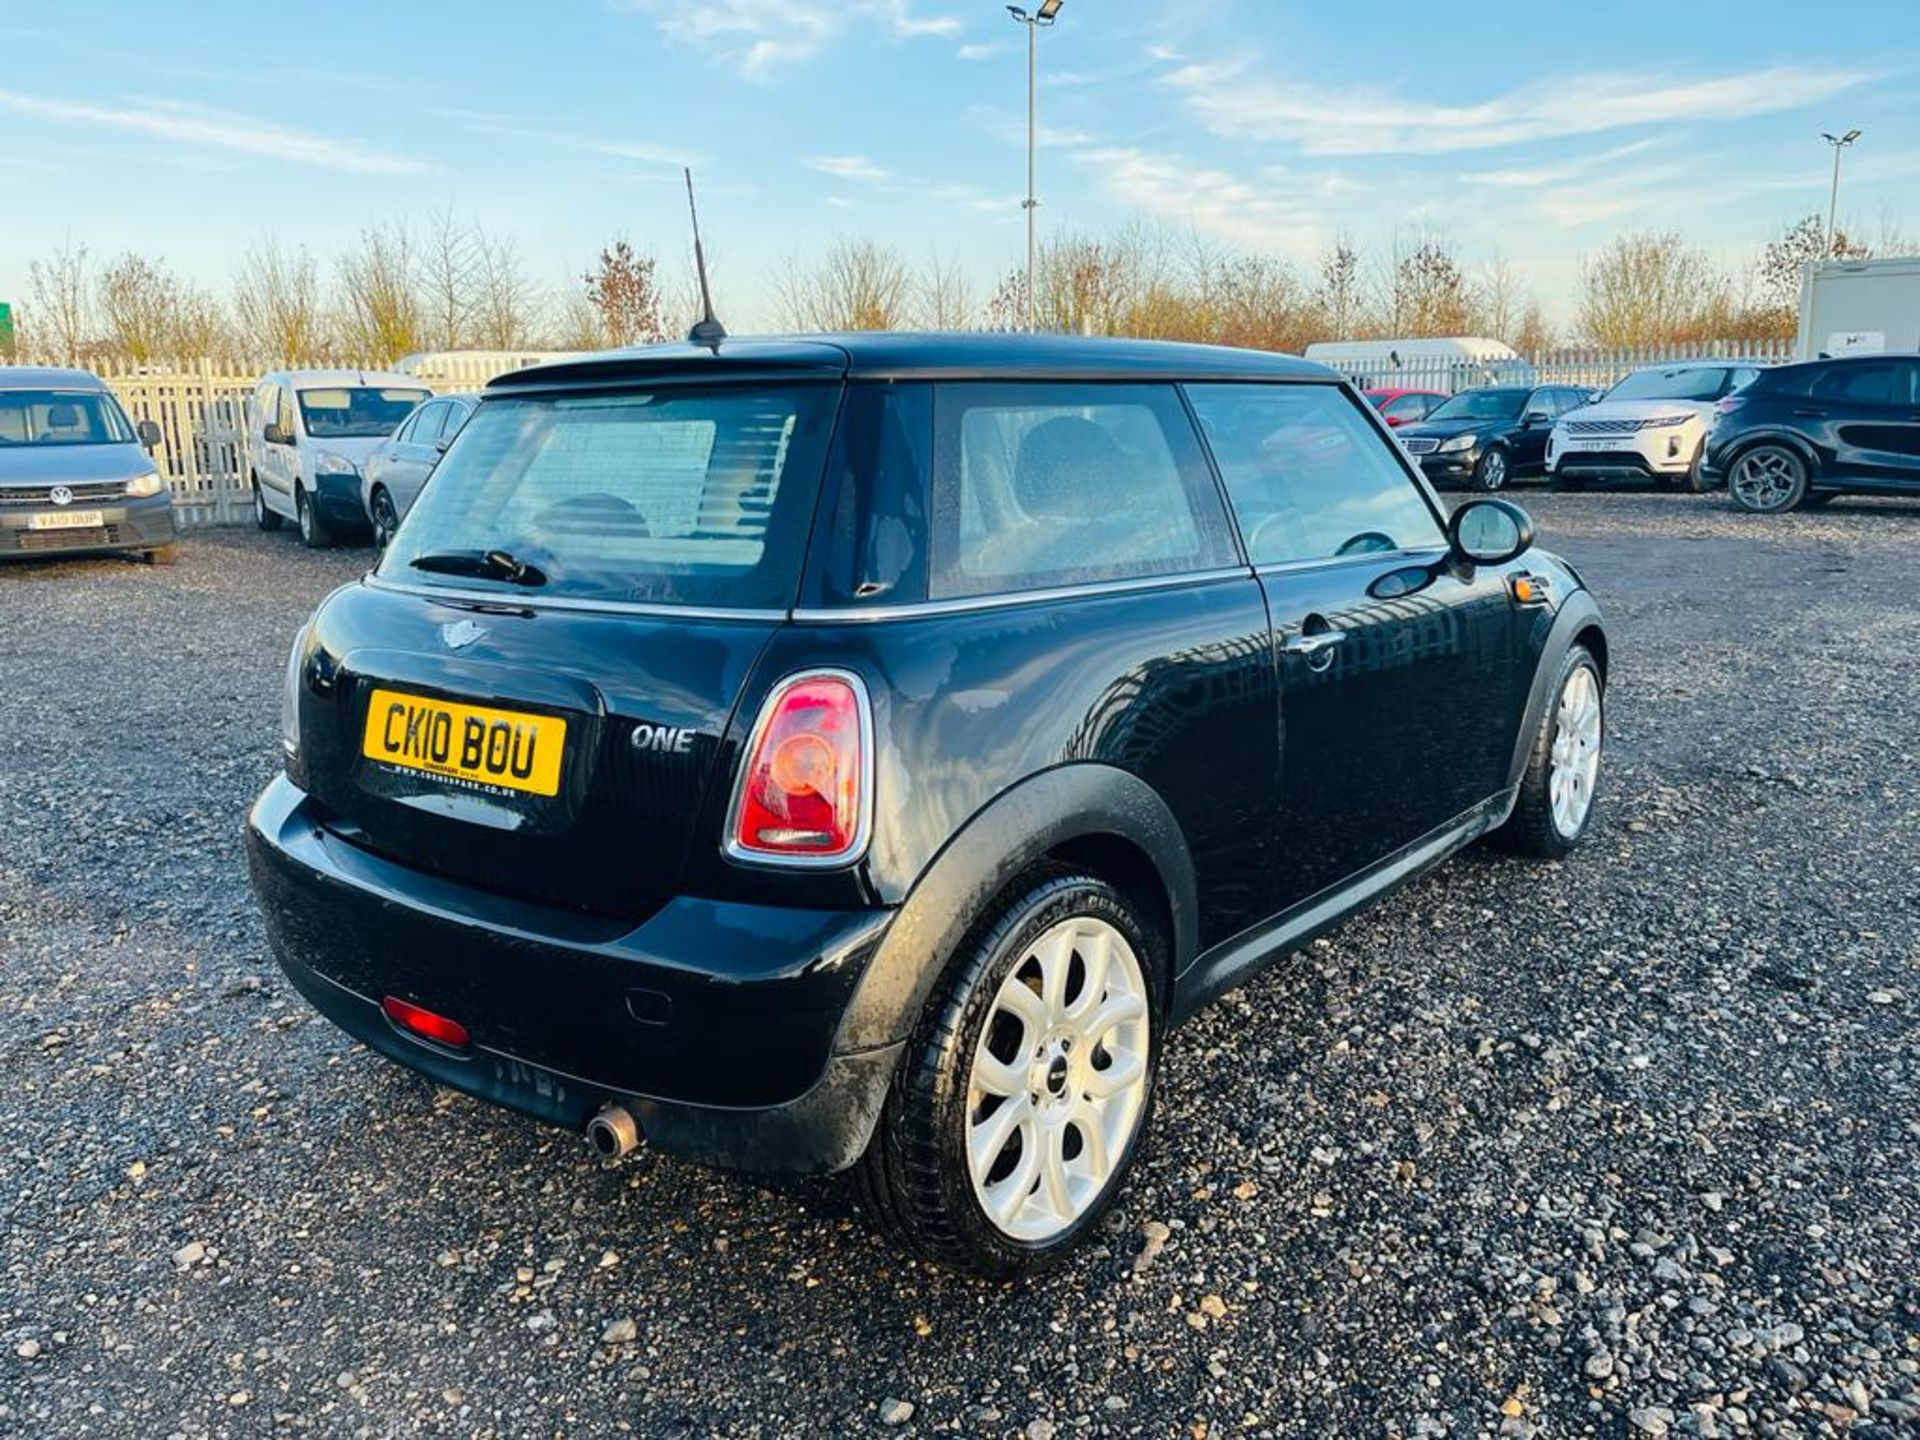 Mini One 1.6 Start/Stop 100 2010 '10 Reg' ' Very Economical' Only 108,430 - Image 9 of 26